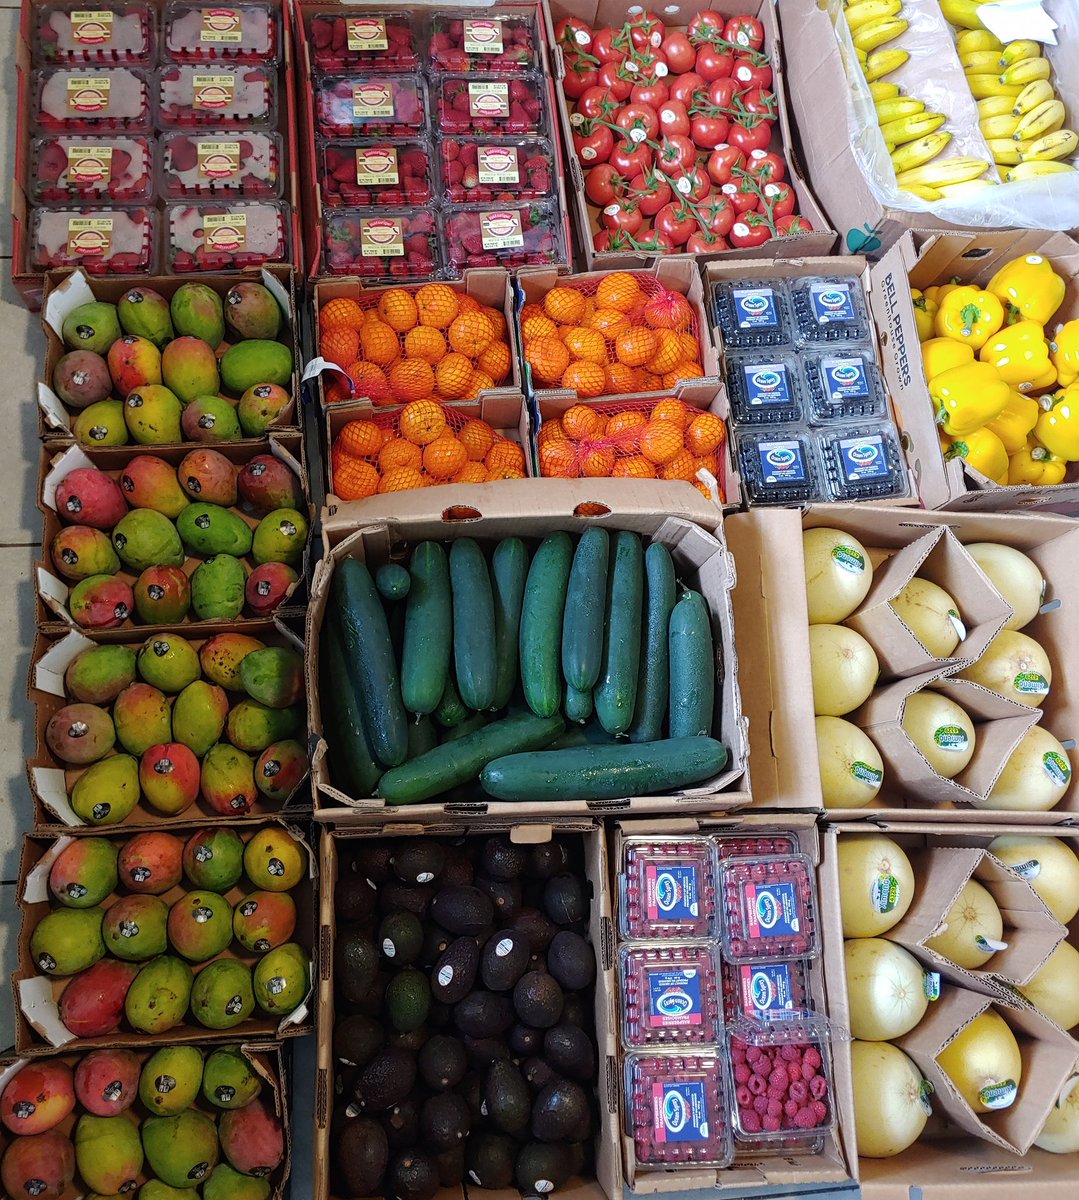 Most people have expensive phones, cars, shoes, jewelry, etc but they say fruit is too expensive. Bananas are around 38 cents per pound but you buy dead animal flesh for way more. Prioritize your health. This is our food haul. Eat to live
#fruitthefuckup
#foodhaul